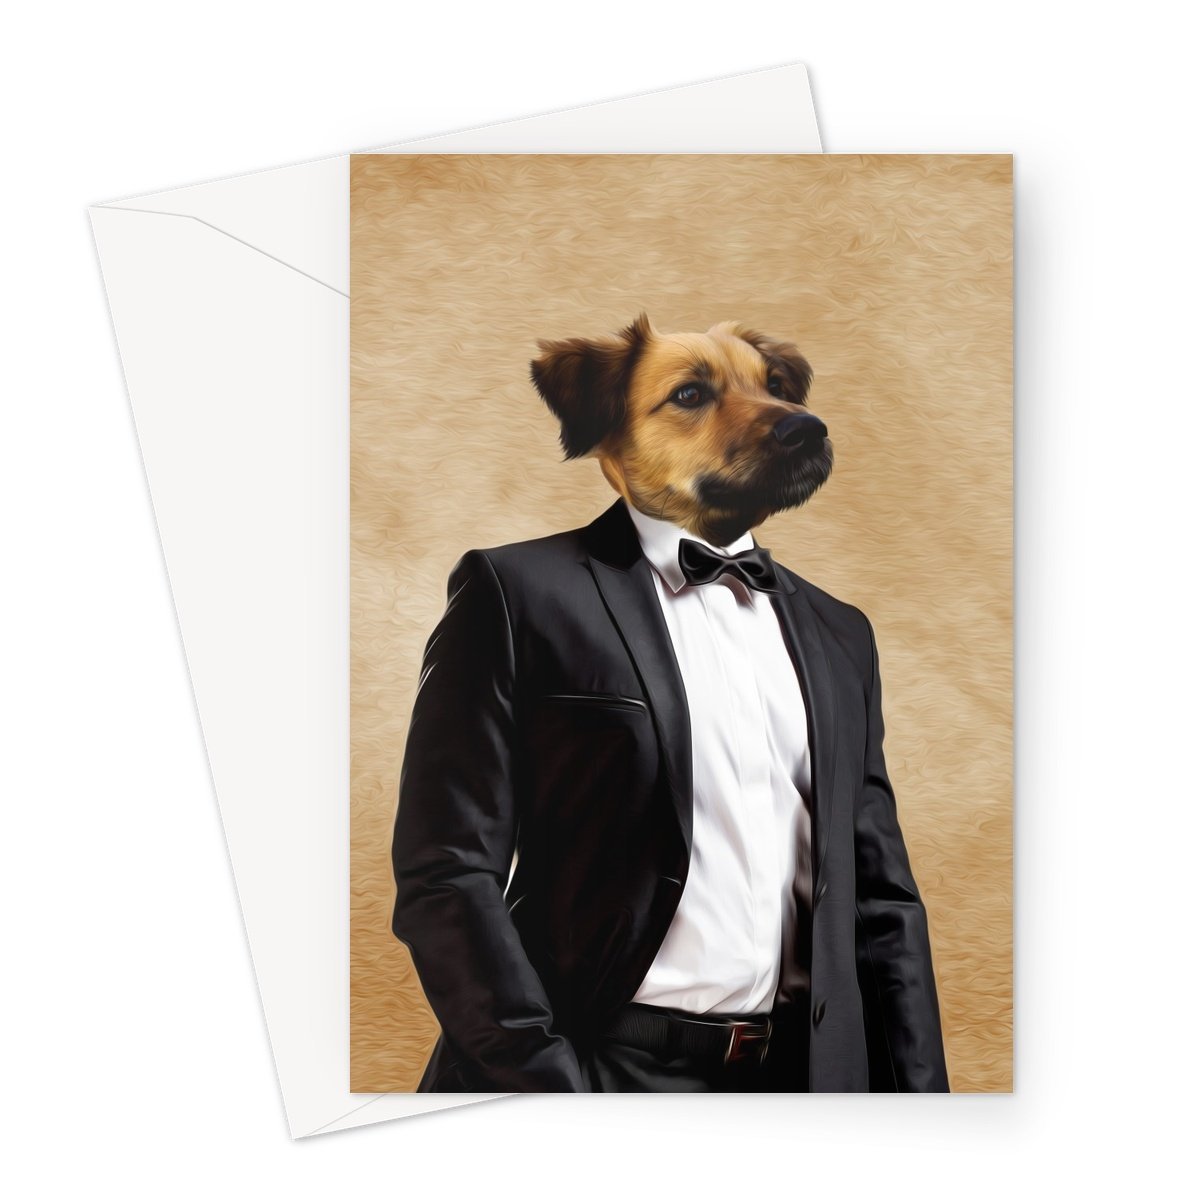 The Gentleman: Custom Pet Greeting Card - Paw & Glory - paw and glory, draw your pet portrait, pet portraits, fancy pet portraits, custom pet portraits south africa, paintings of pets from photos, drawing dog portraits, pet portraits